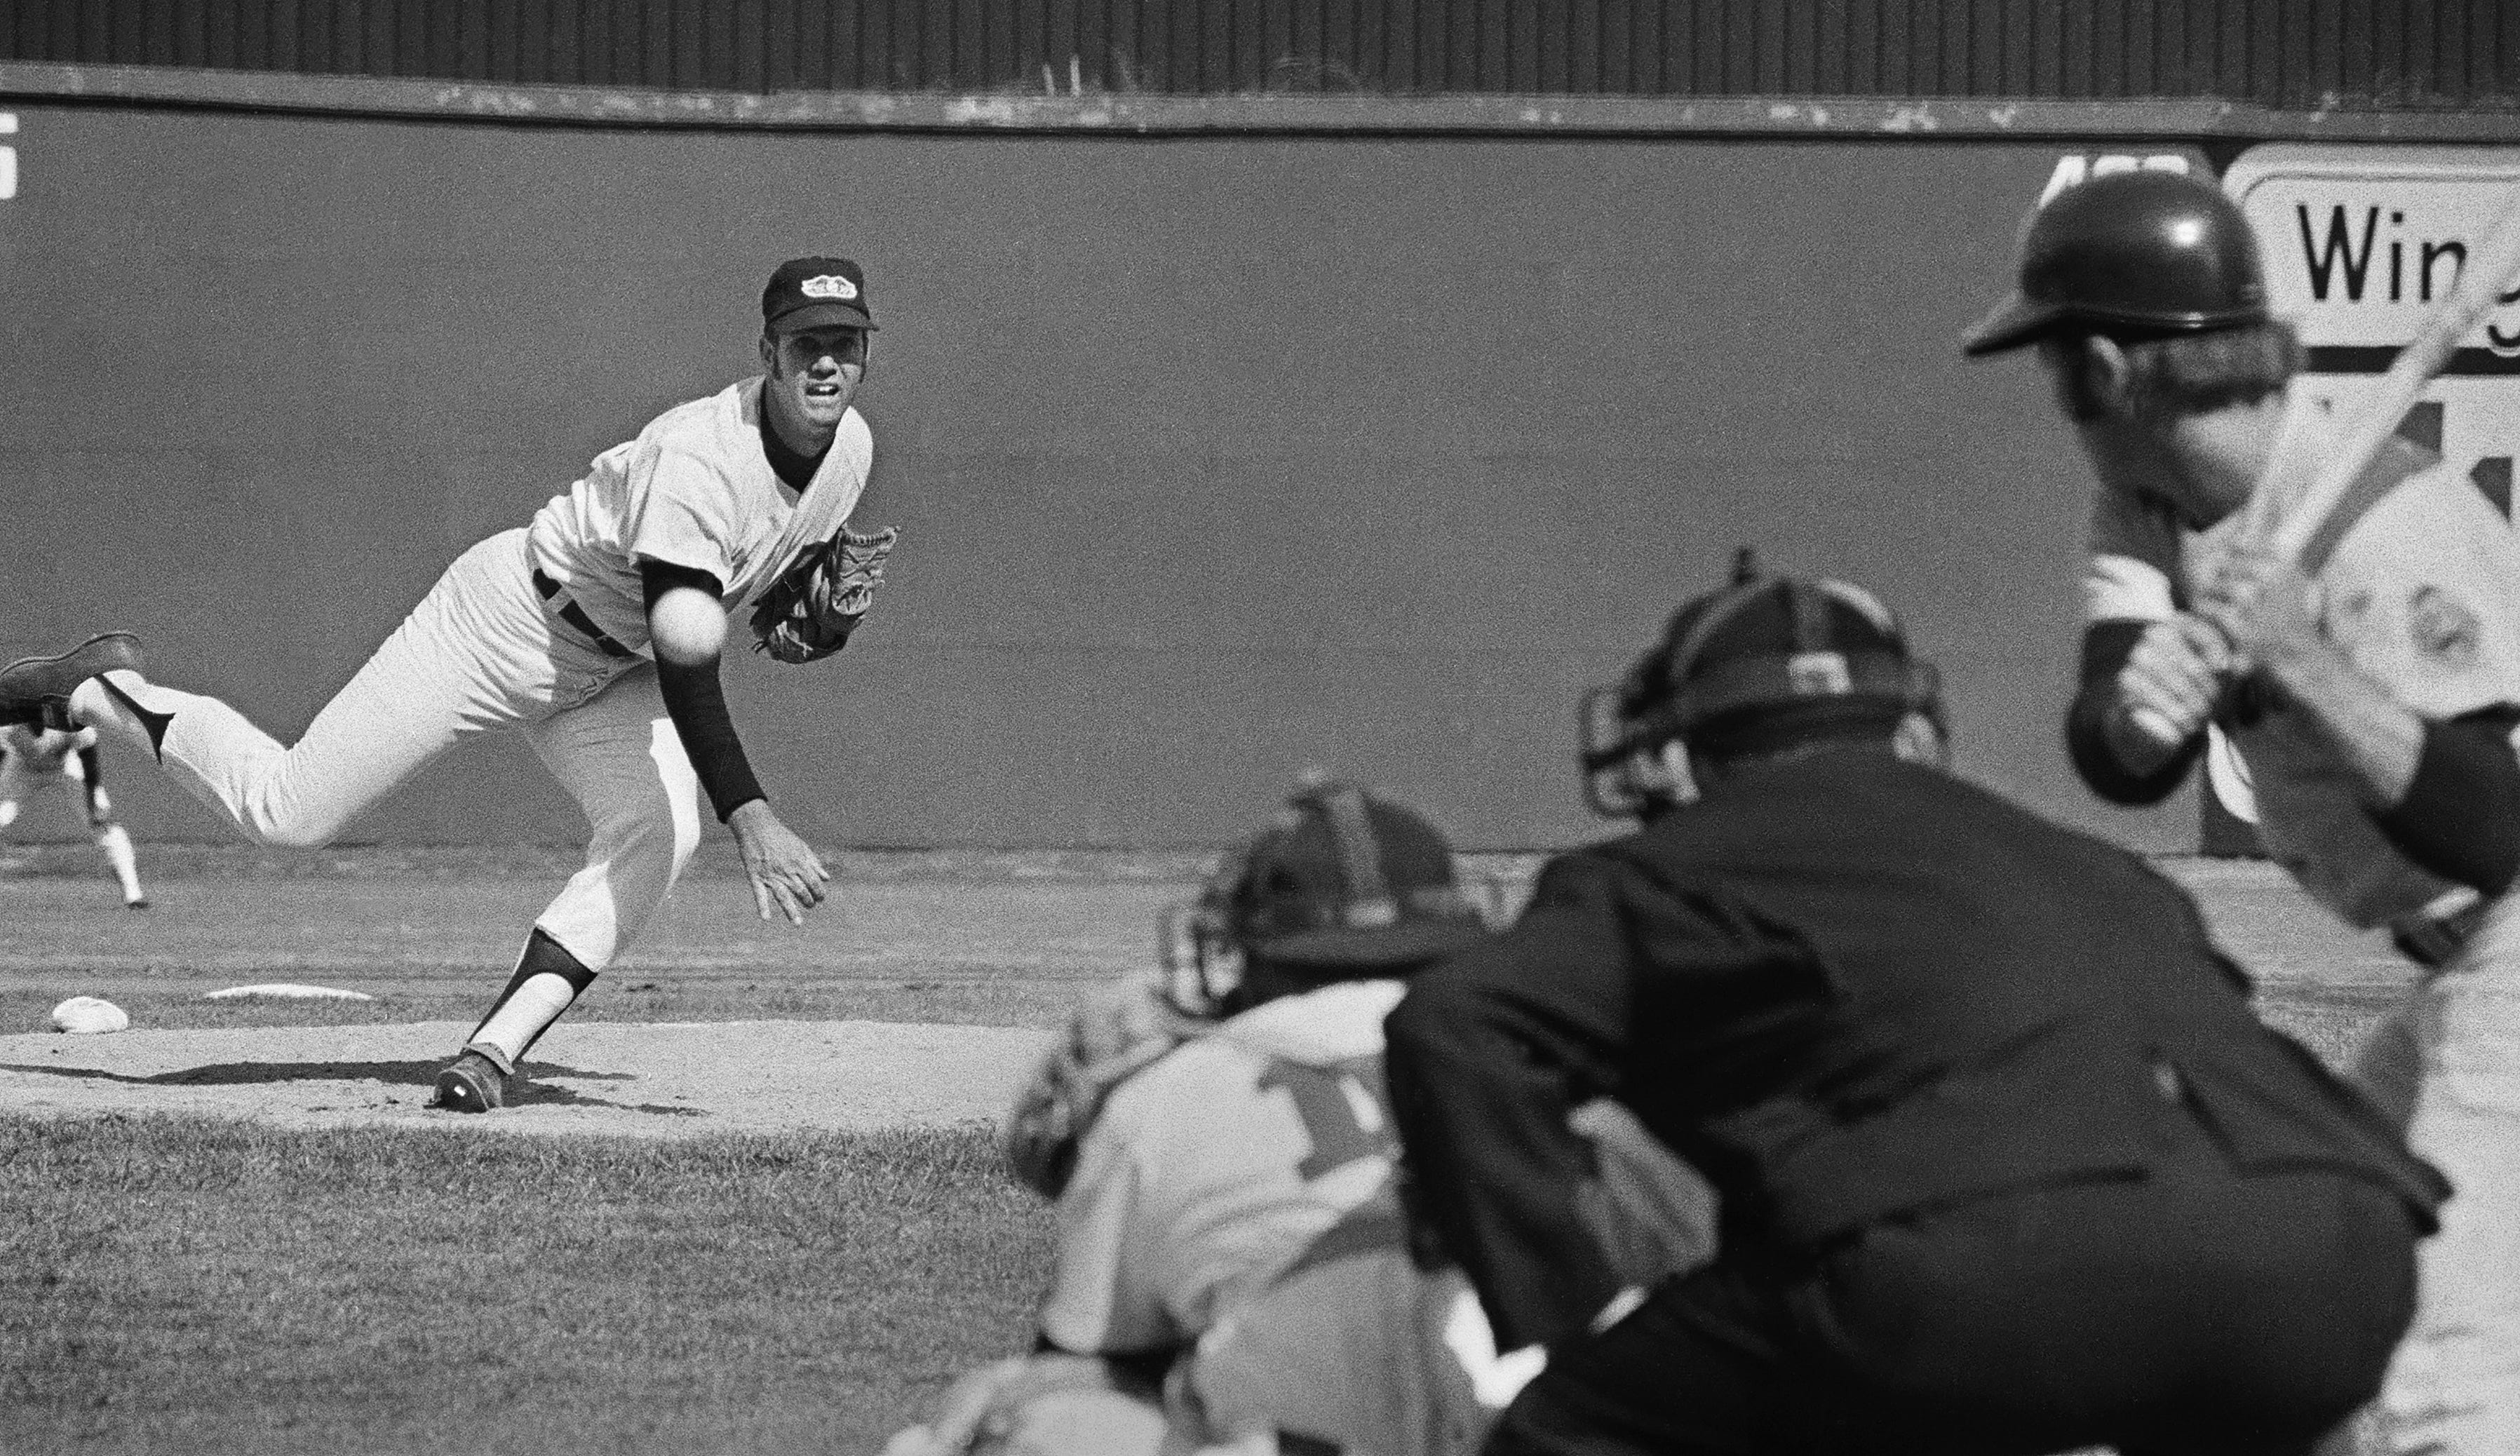 Rochester Red Wings 1971 team: Meet the players who won the title